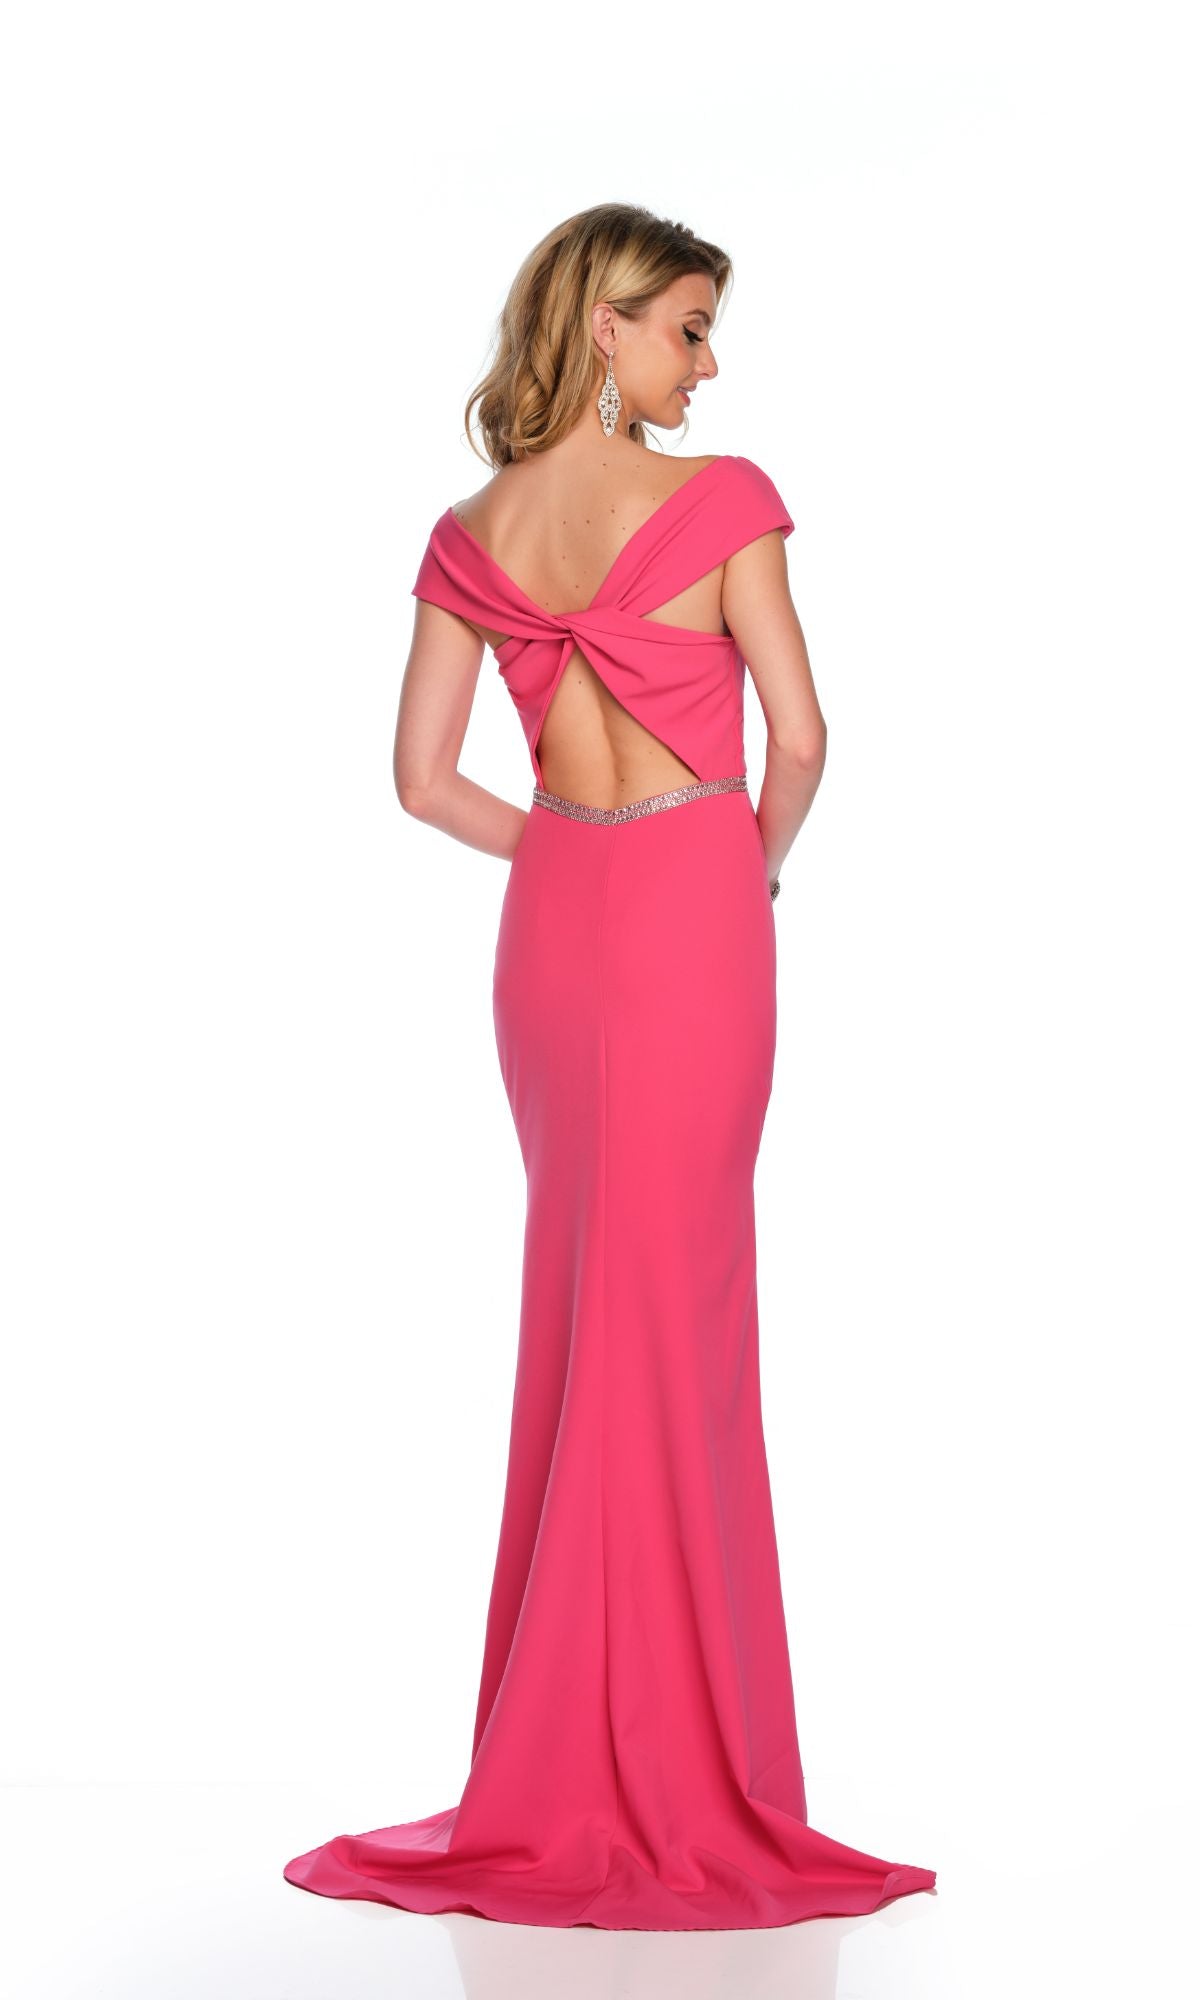 Long Formal Dress 11629 by Dave and Johnny